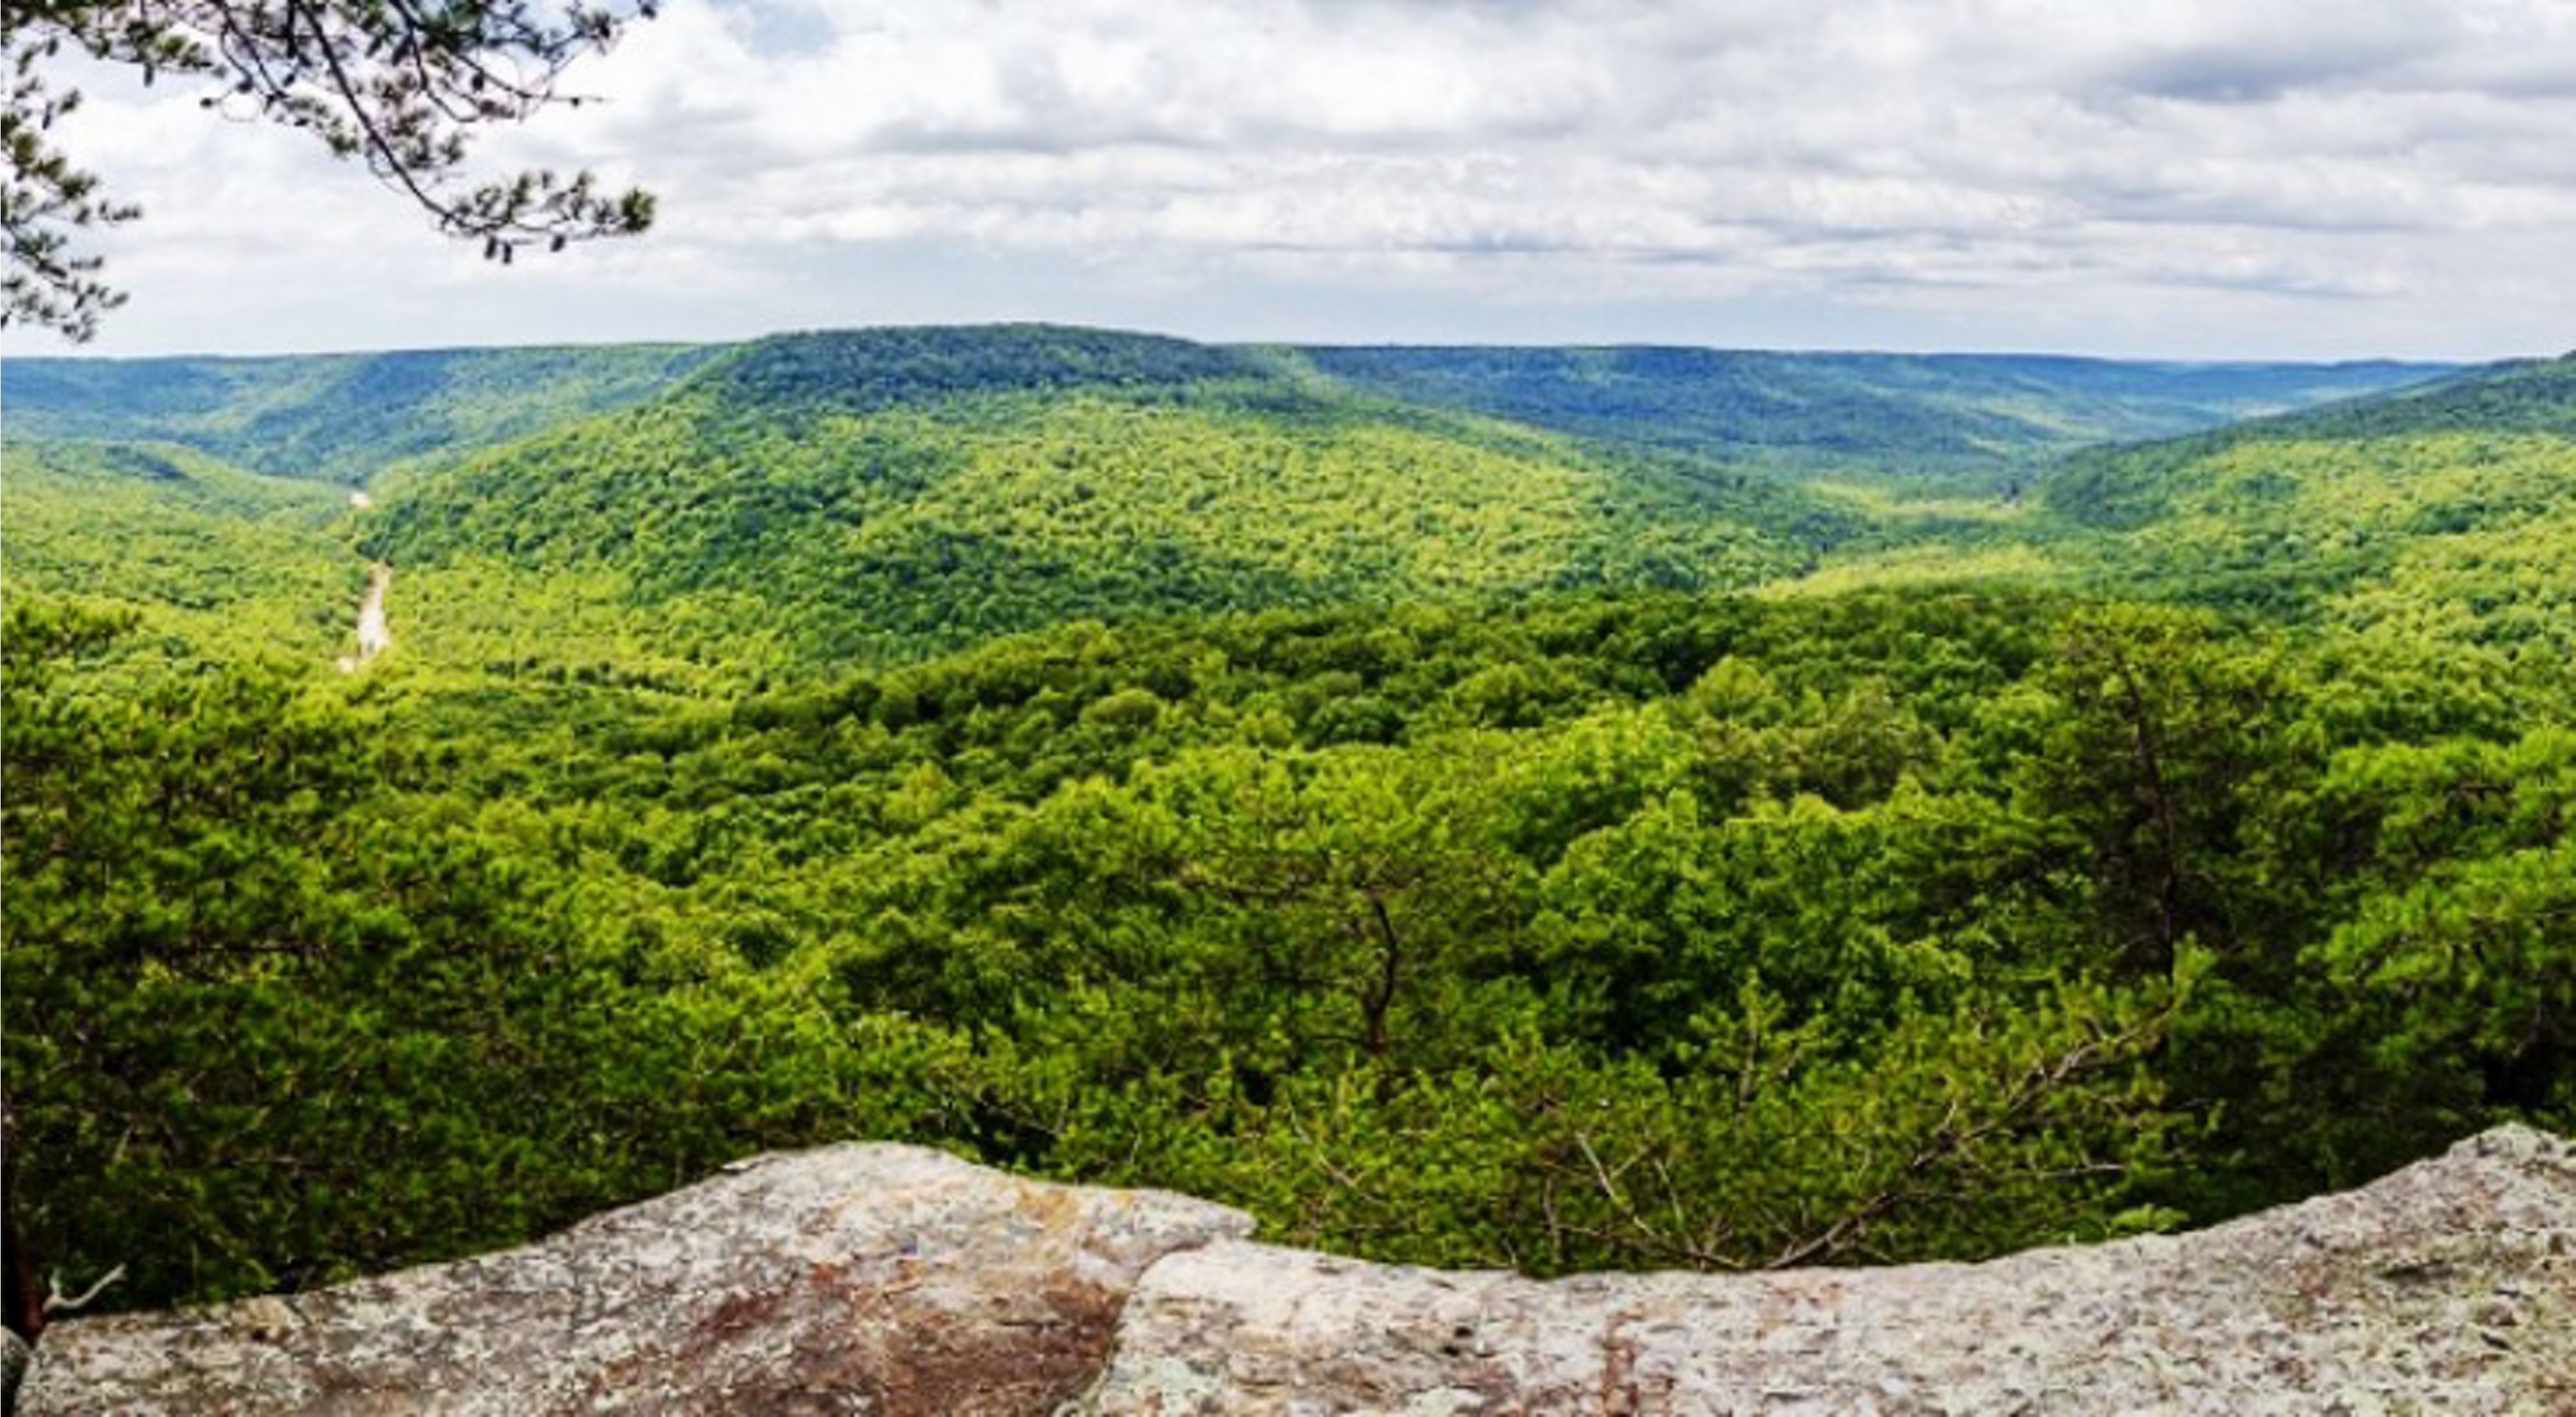 A rock outcrop looks out on a dense, green forested valley.